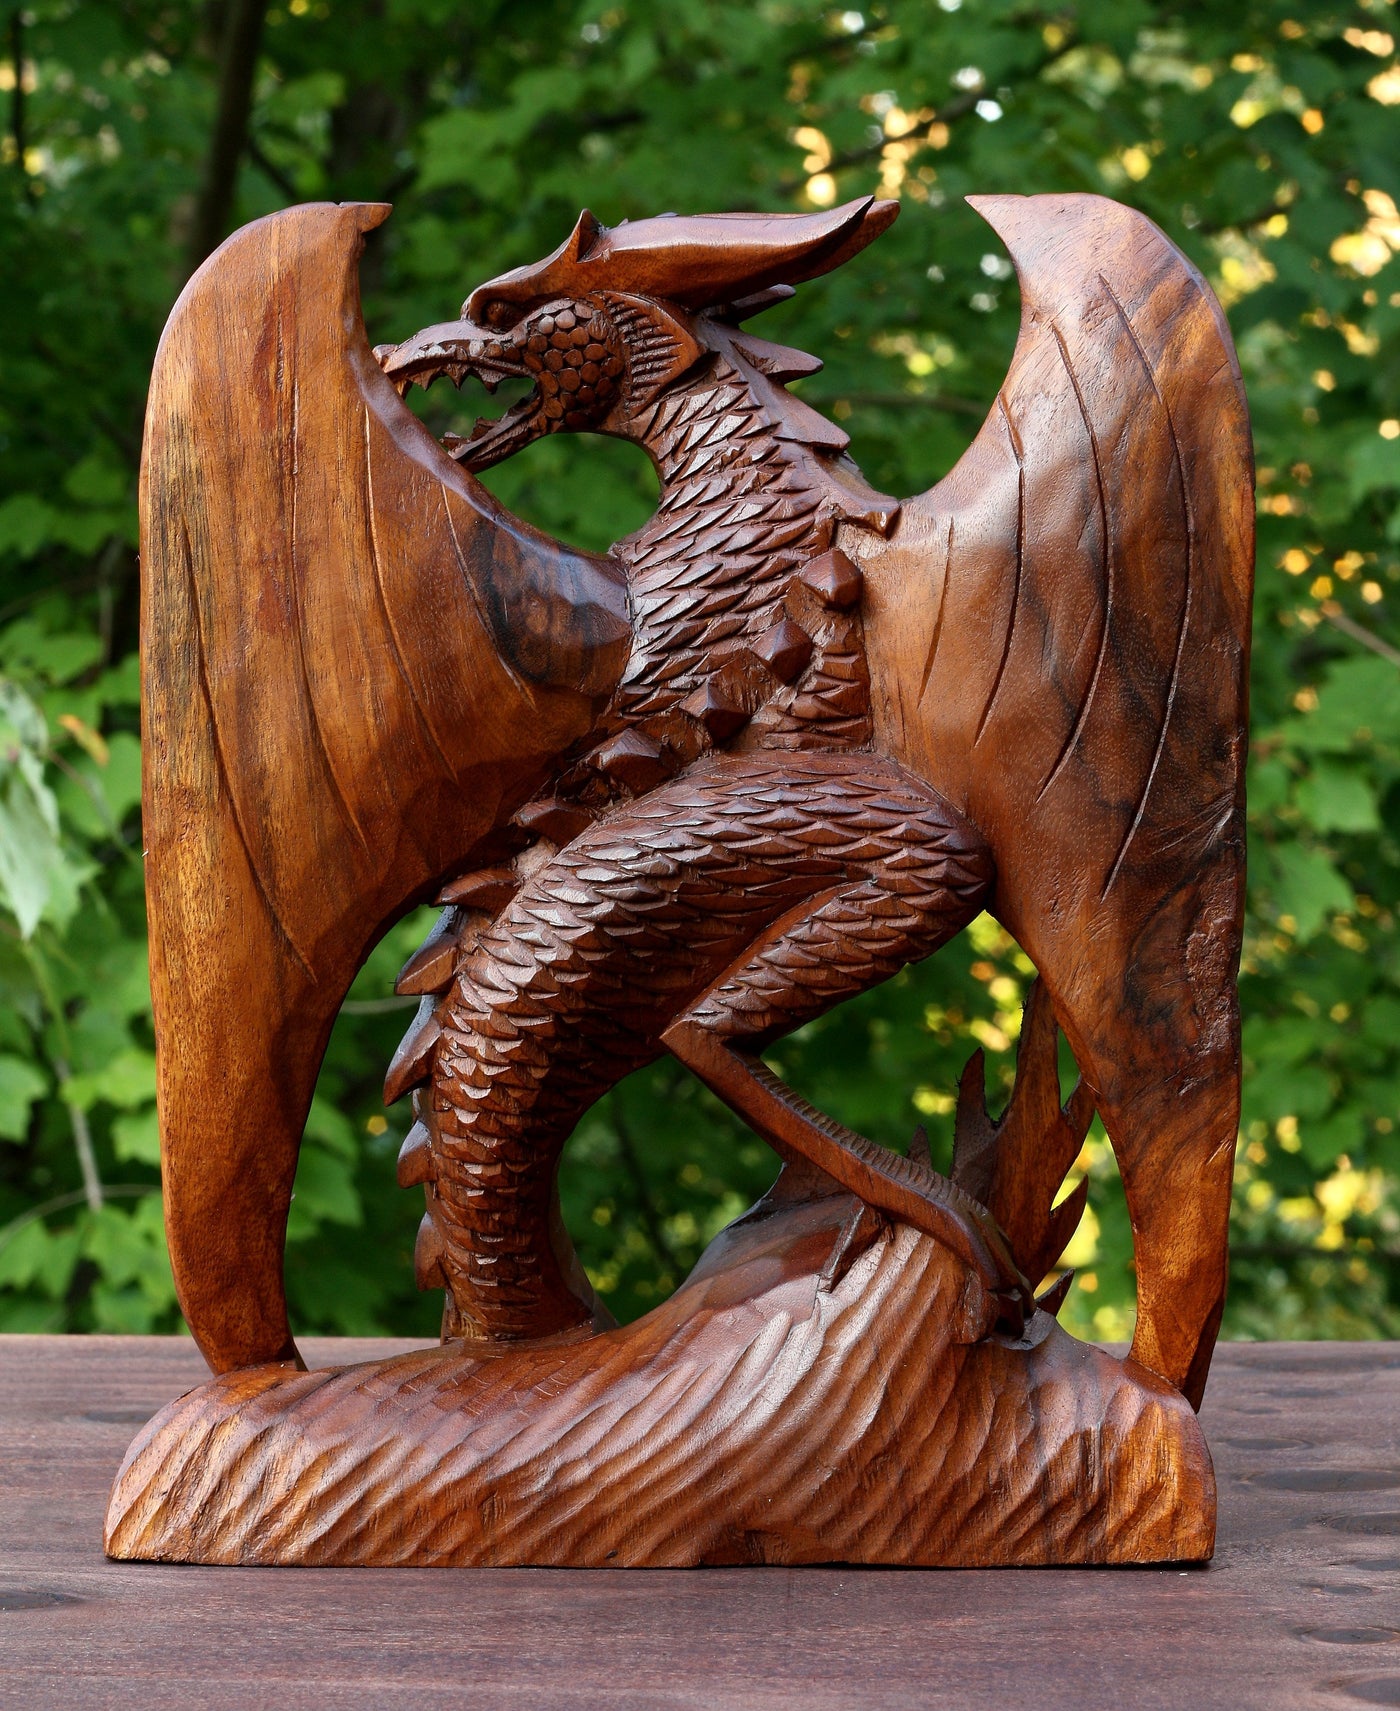 Wooden Crawling Dragon Handmade Sculpture Statue Handcrafted Gift Art  Decorative Home Decor Figurine Accent Decoration Artwork Hand Carved Size:  16 long x 7.5 tall x 4 deep 